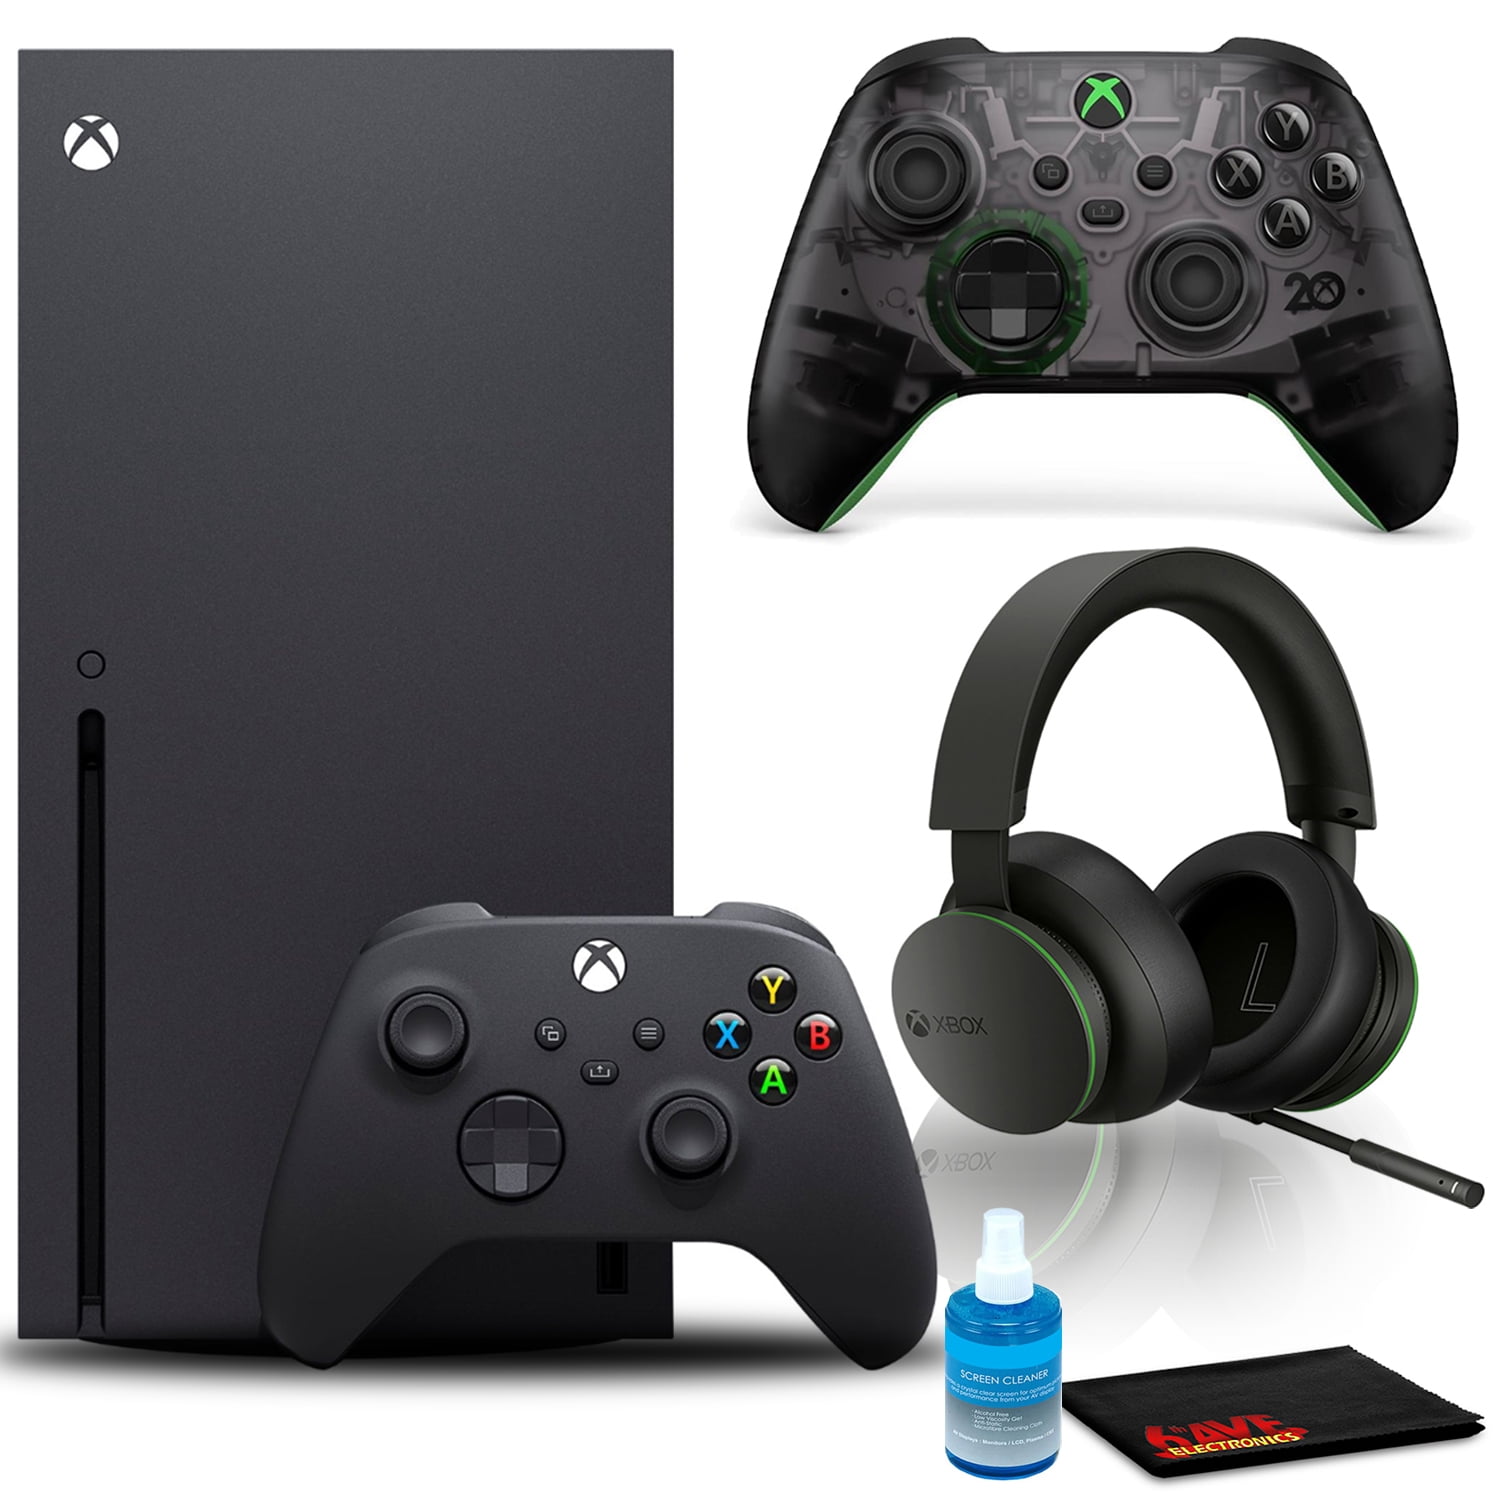 Microsoft XBOX X Video Game Consoles XBX Xbox Wireless Controller XBOX  SERIES X 1TB console Up to 120 FPS Unlocked Version